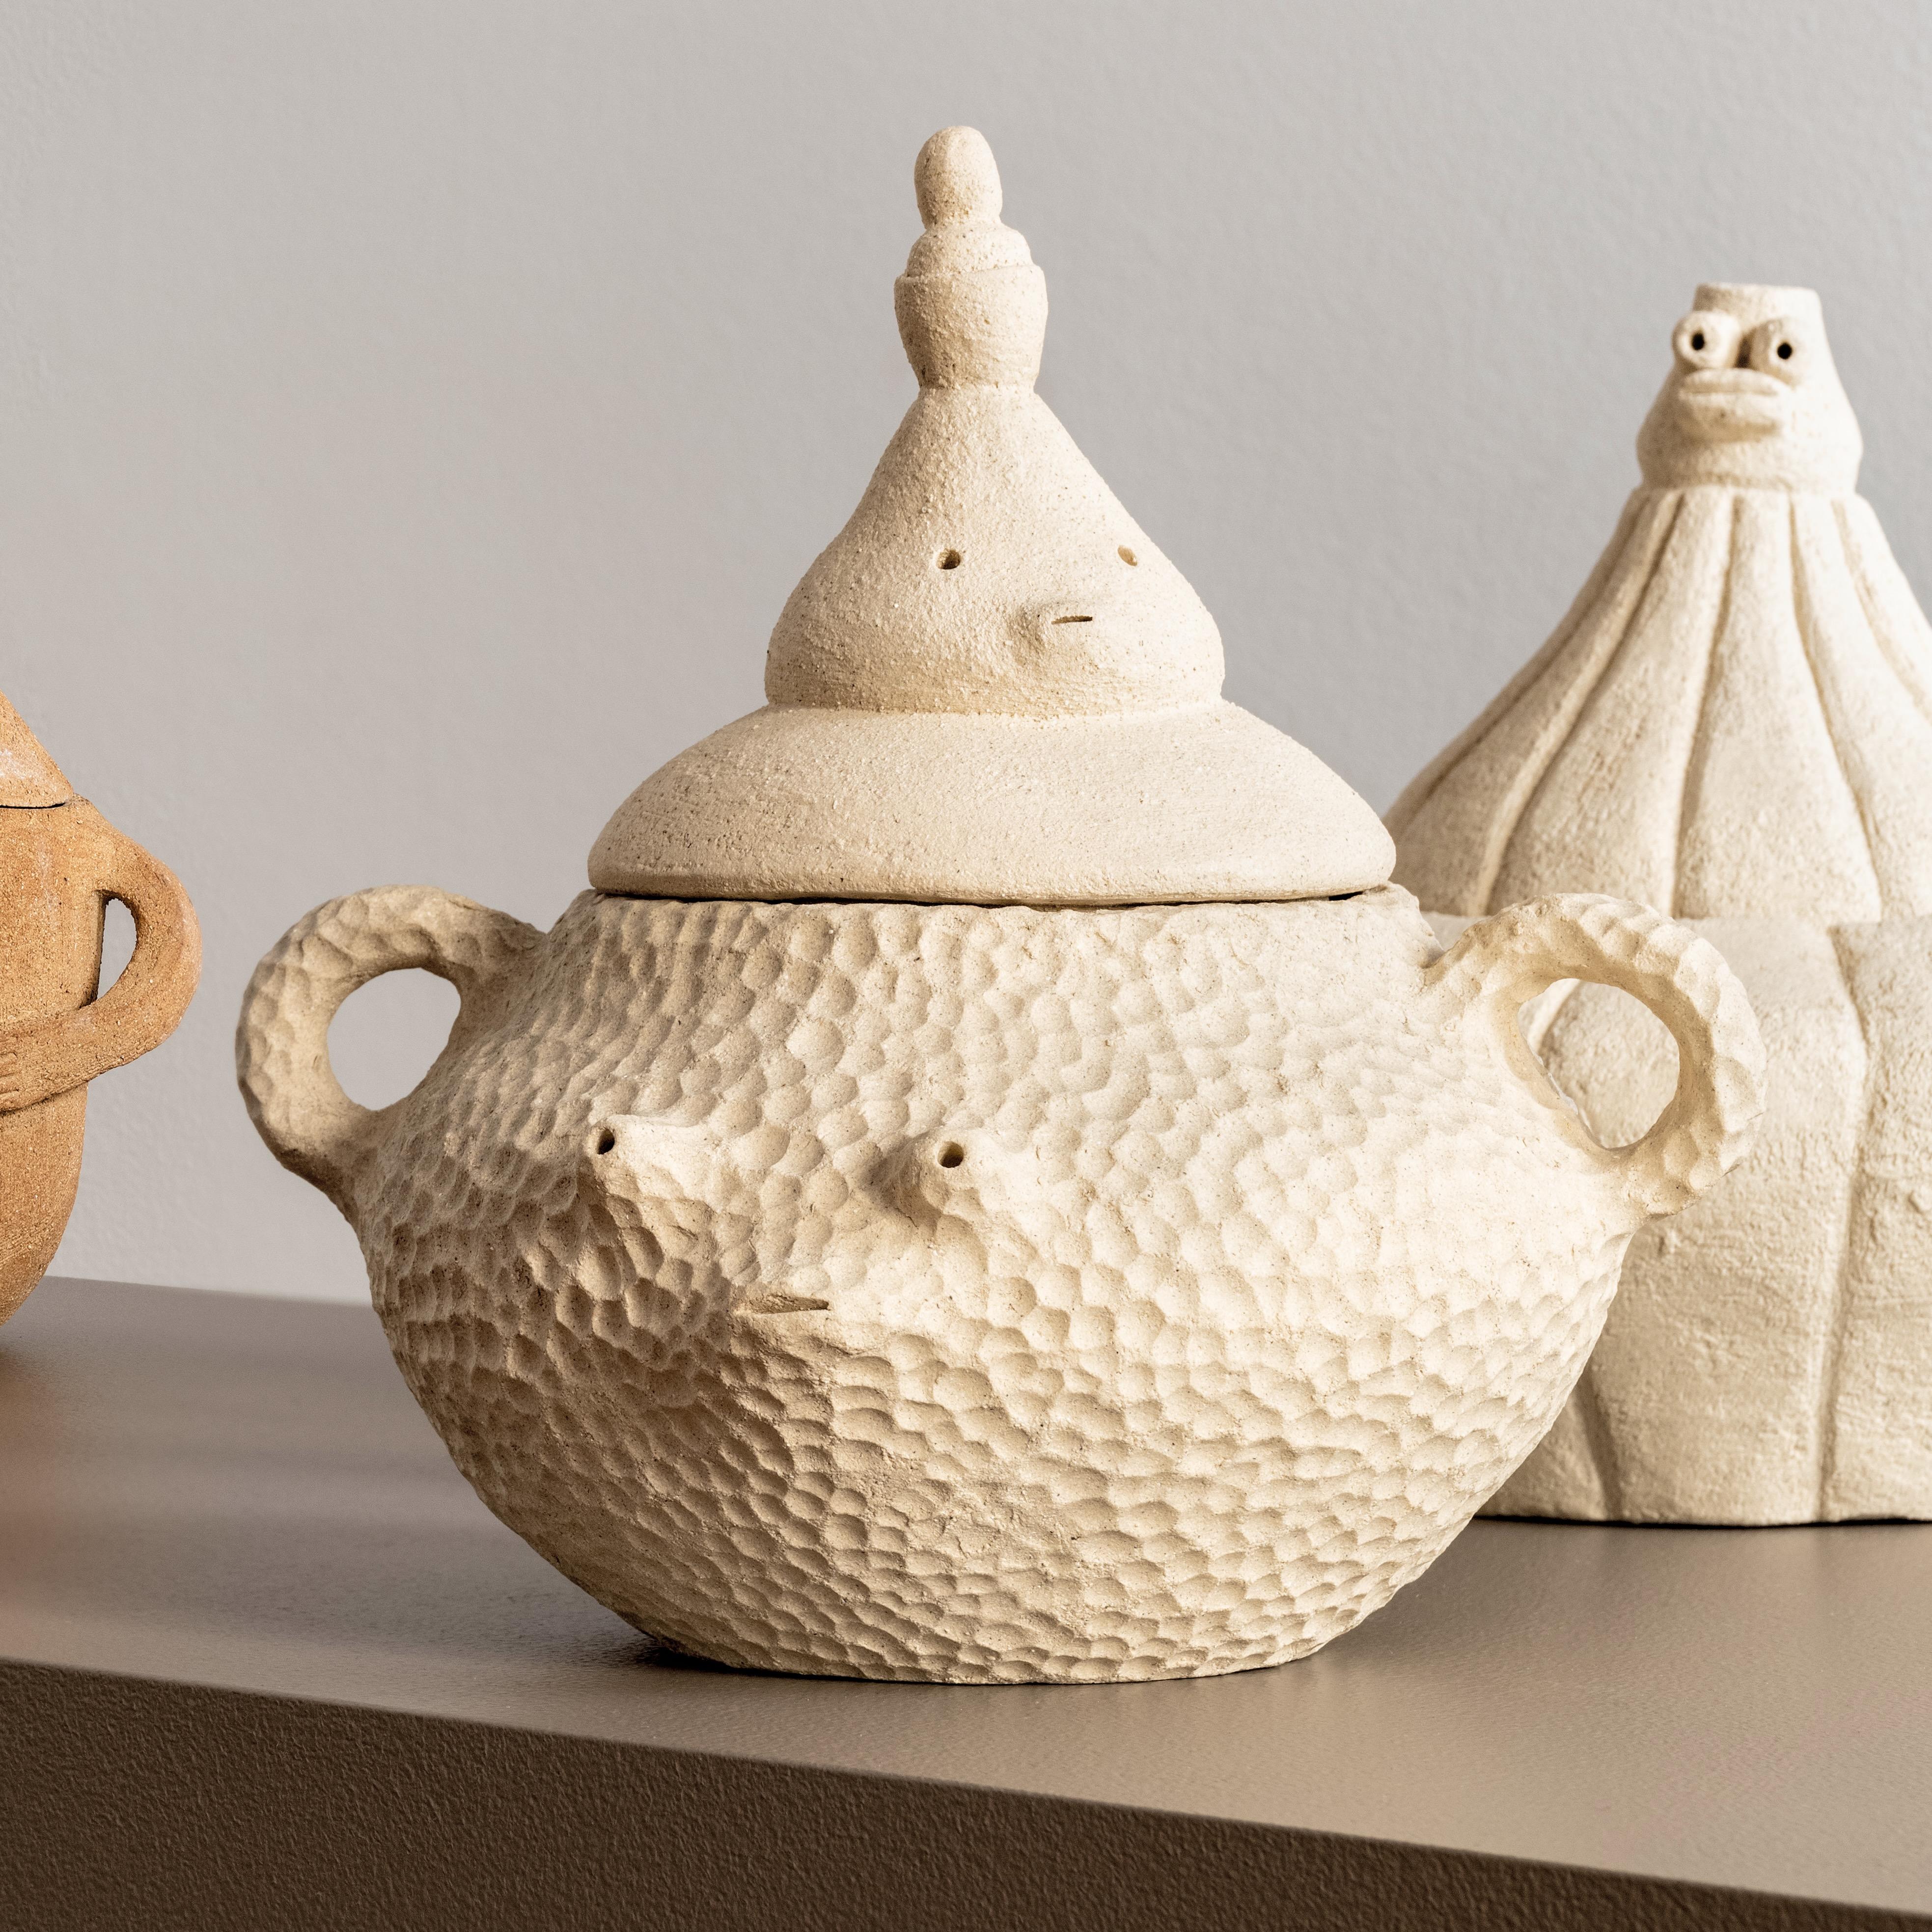 Unique, organic modern figural ceramic dual-handled tureen/servingware by Meritxell Duran, handmade in Spain. 

This charming creature is crafted of refractory clay, also known as fire clay, which is valued for its ability to resist high